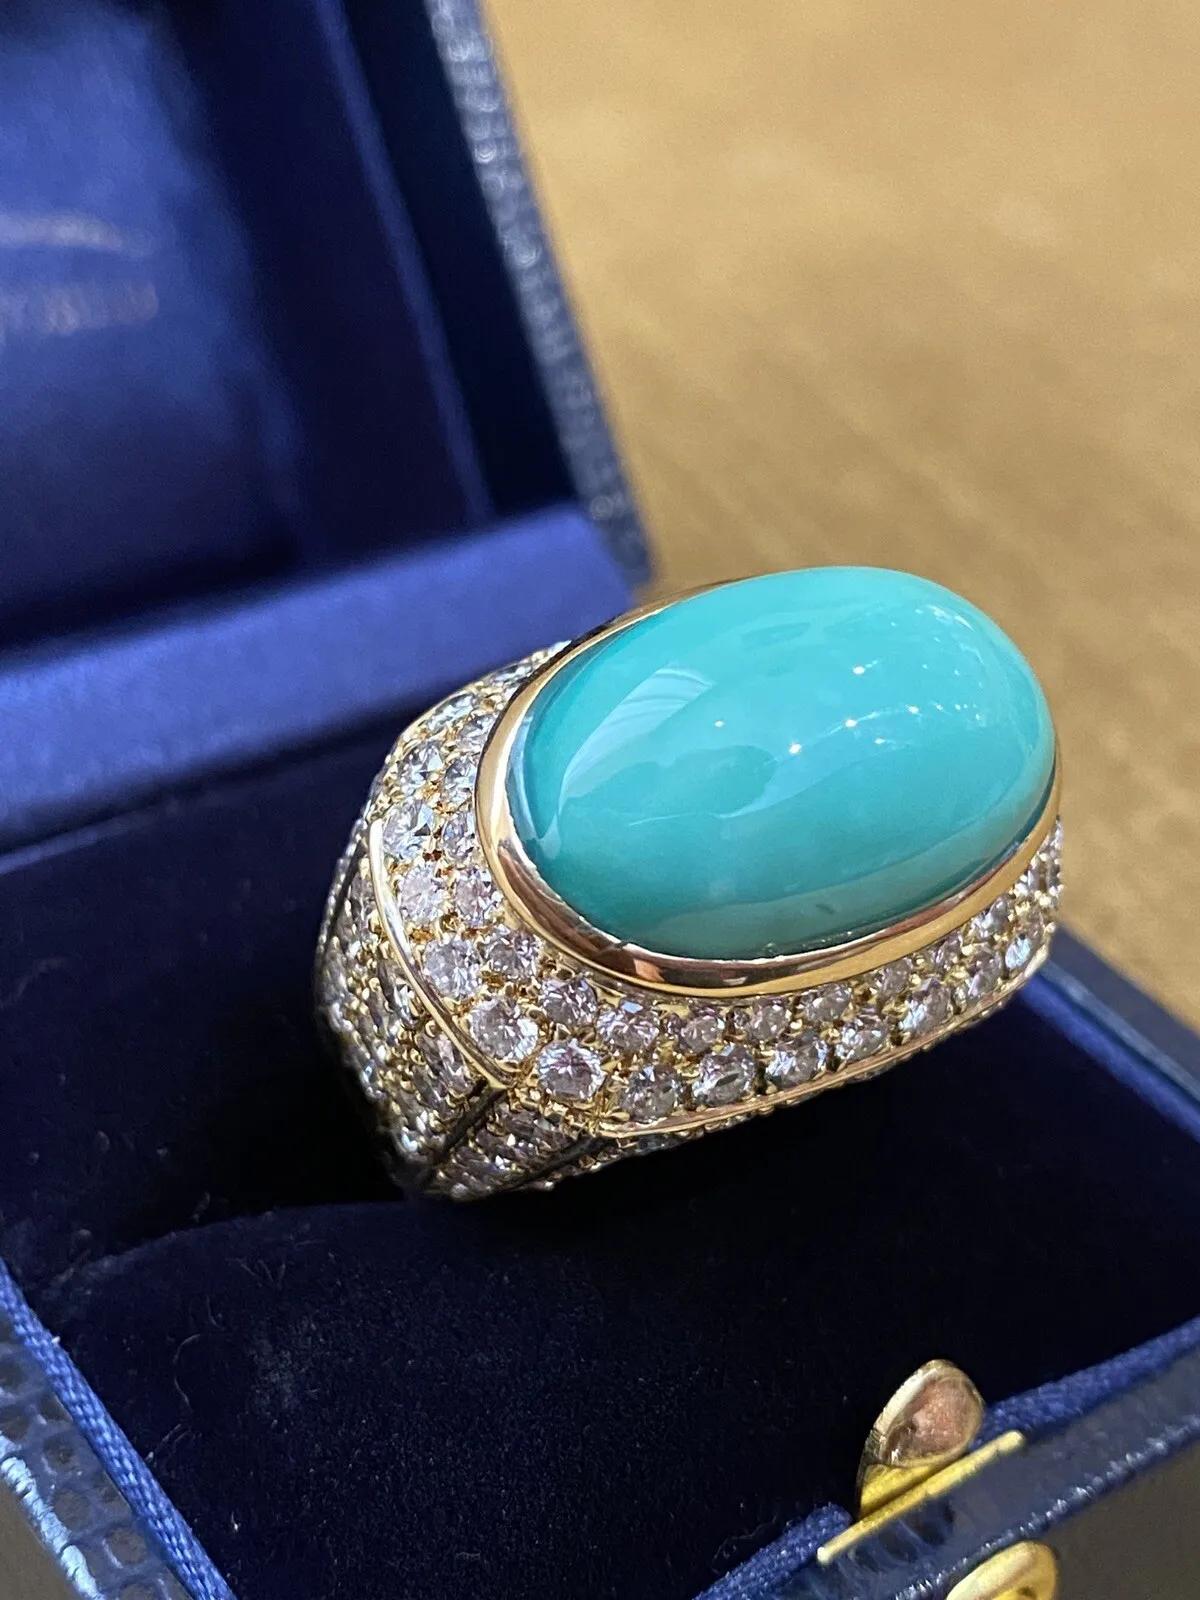 Large Pavé Diamond and Turquoise Dome Ring in 18k Yellow Gold

Estate Turquoise and Diamond Ring features a large Oval Turquoise Cabochon bezel set horizontally with a High Dome Setting and Round Brilliant Diamonds Pavé set in 18k Yellow